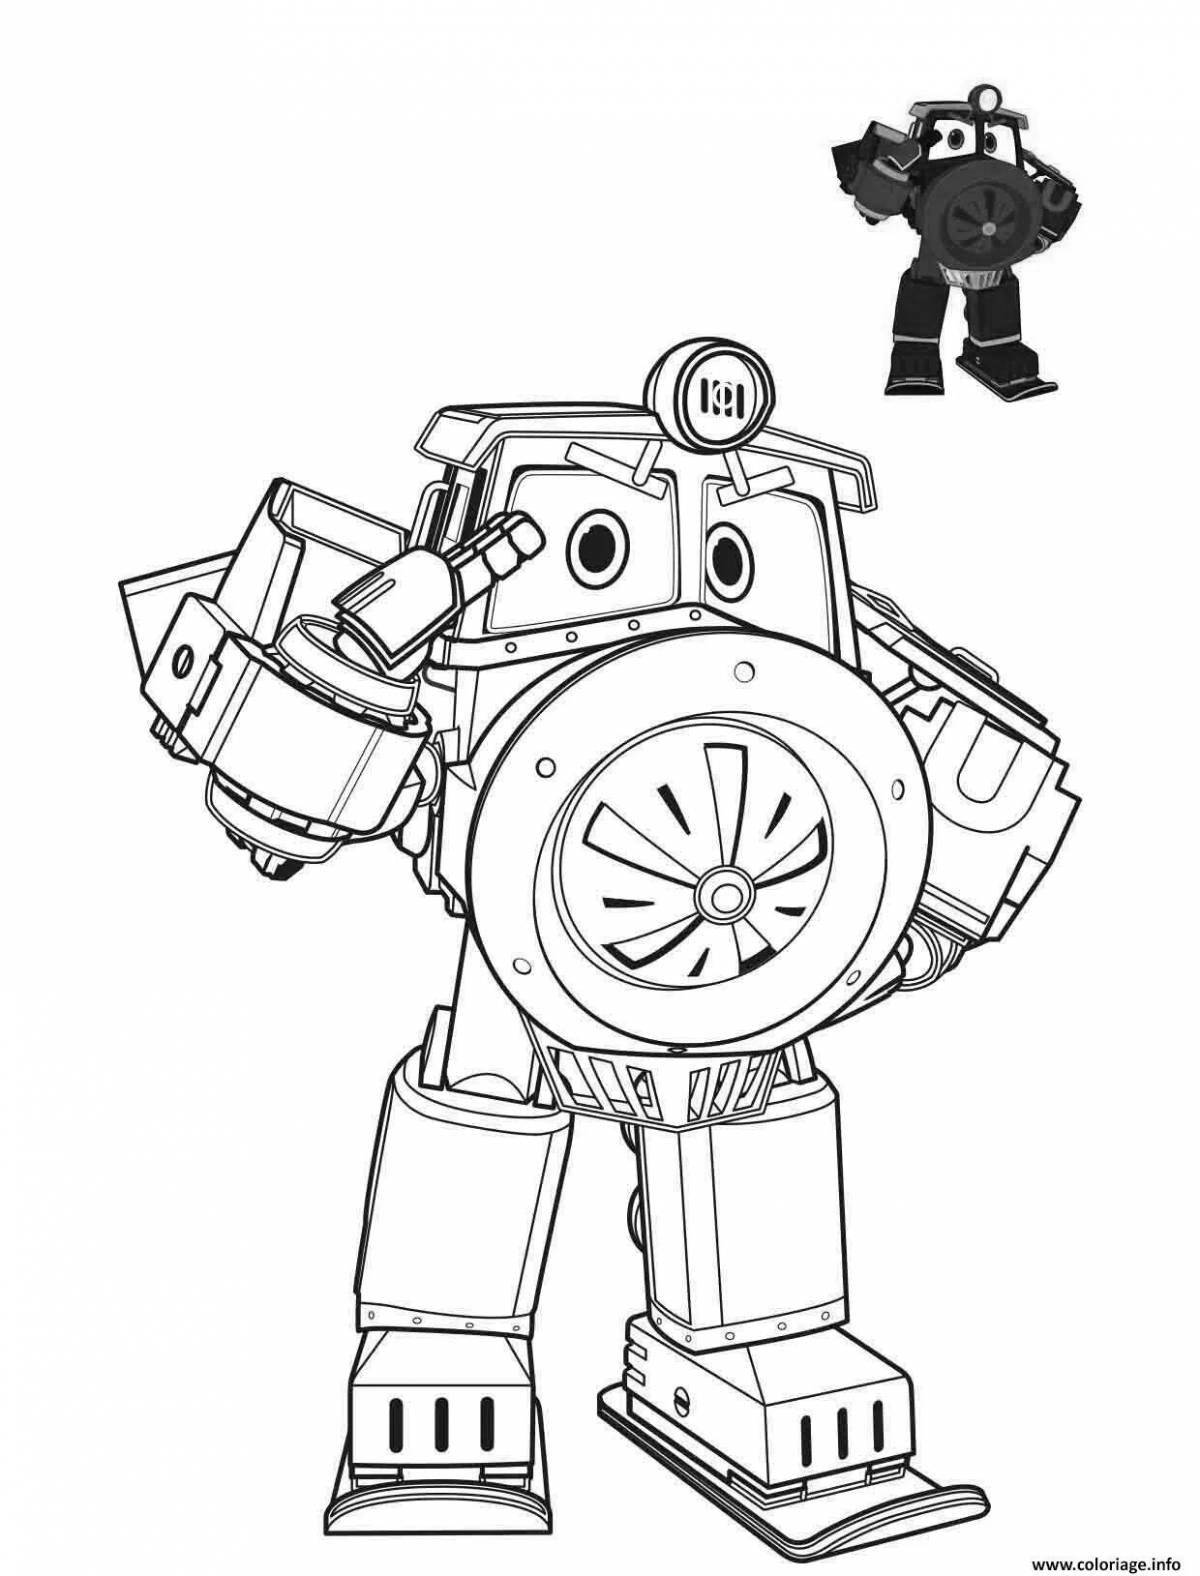 Maxi robot train coloring page with rich colors